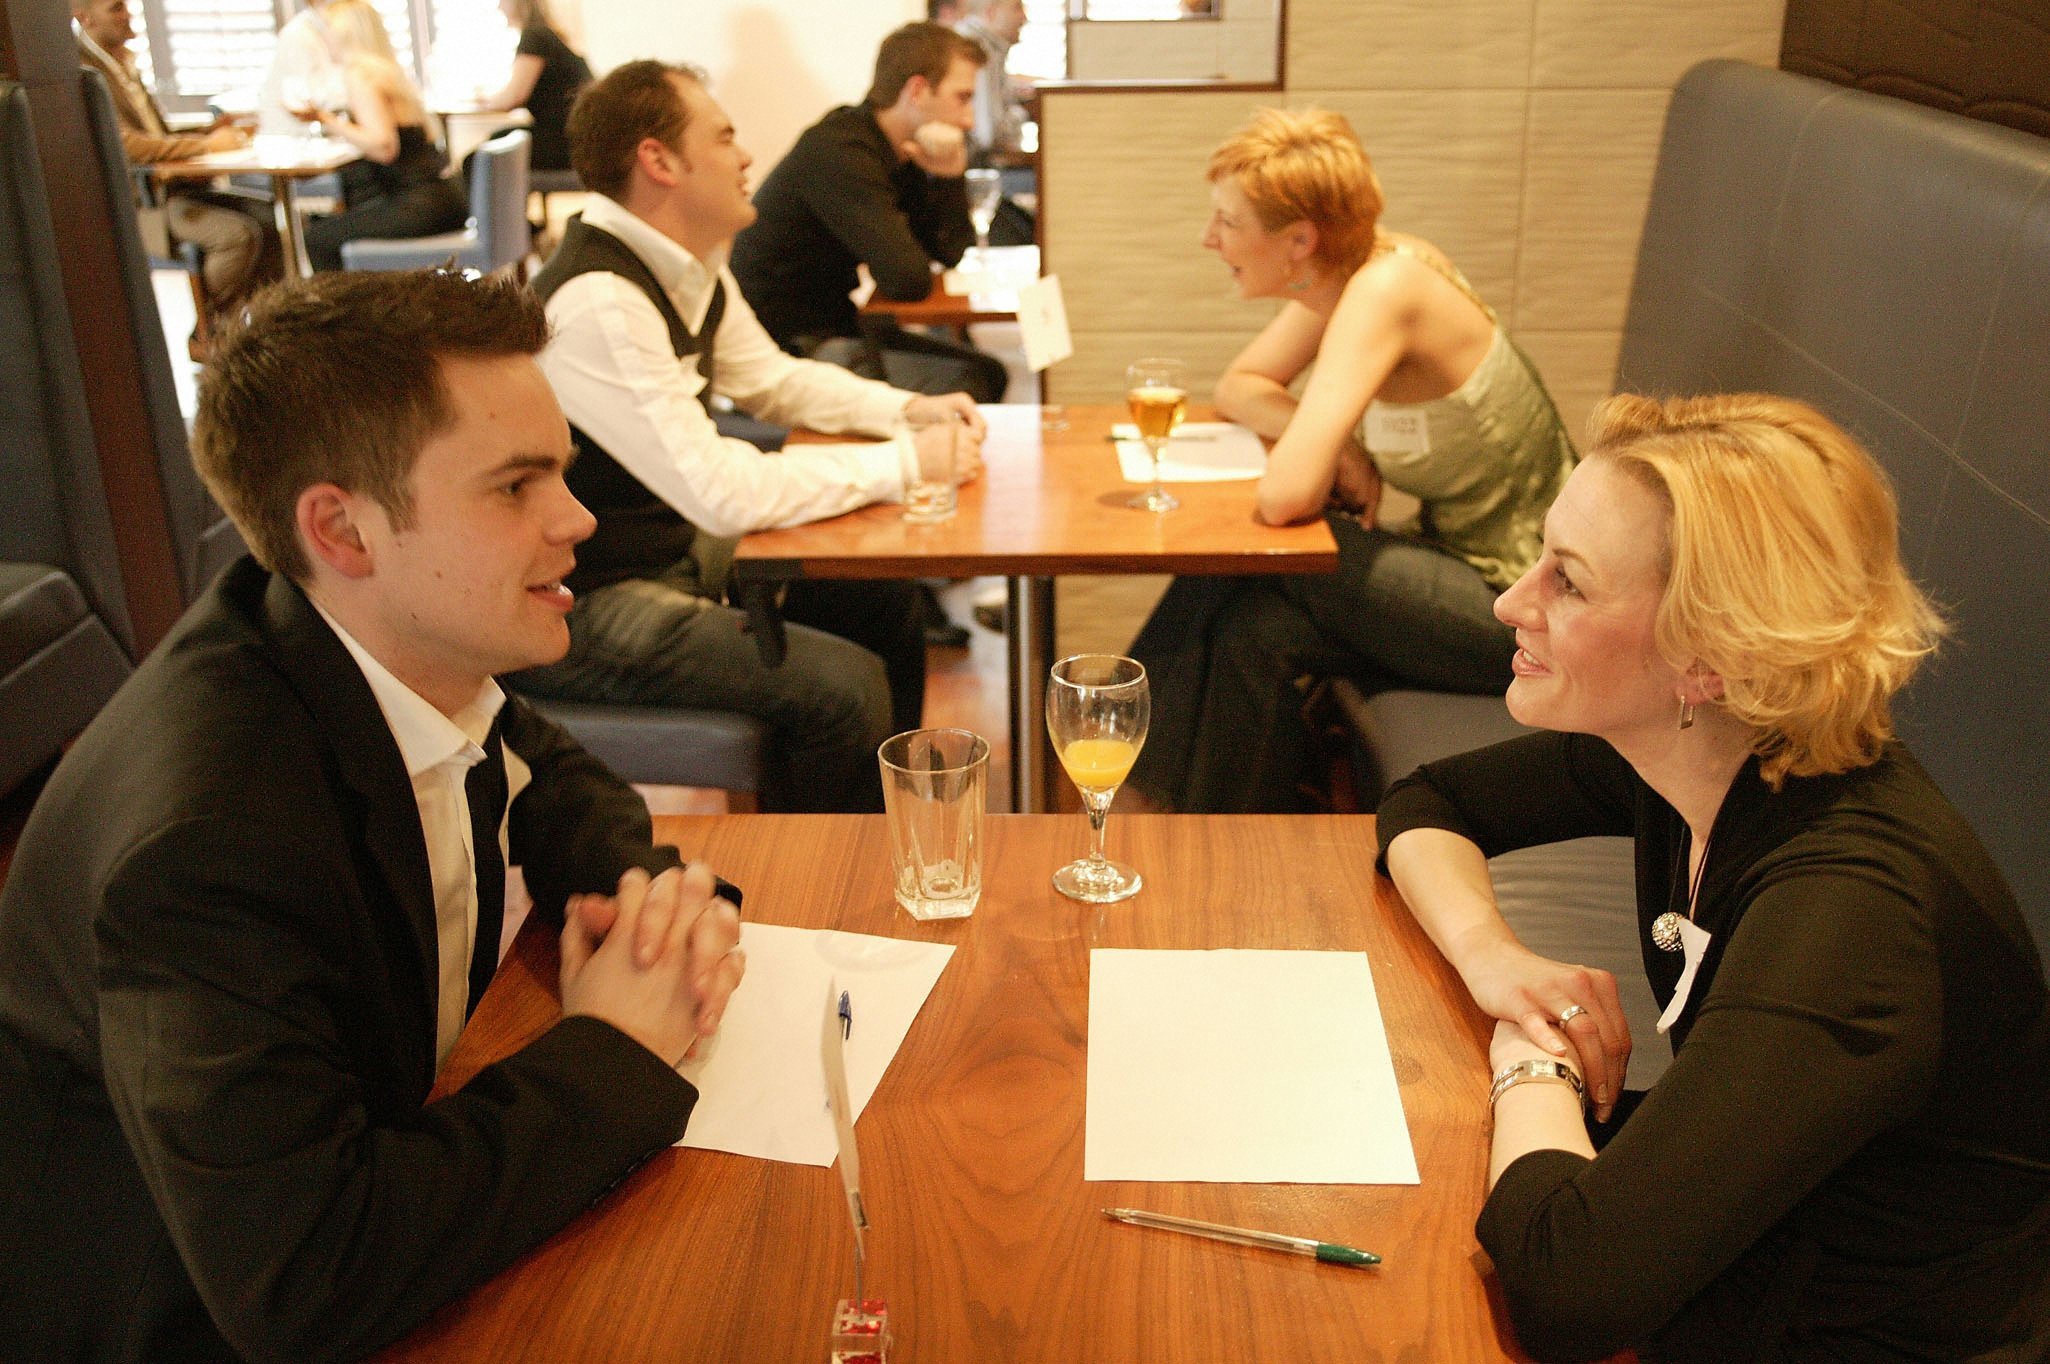 How to start a successful speed dating business